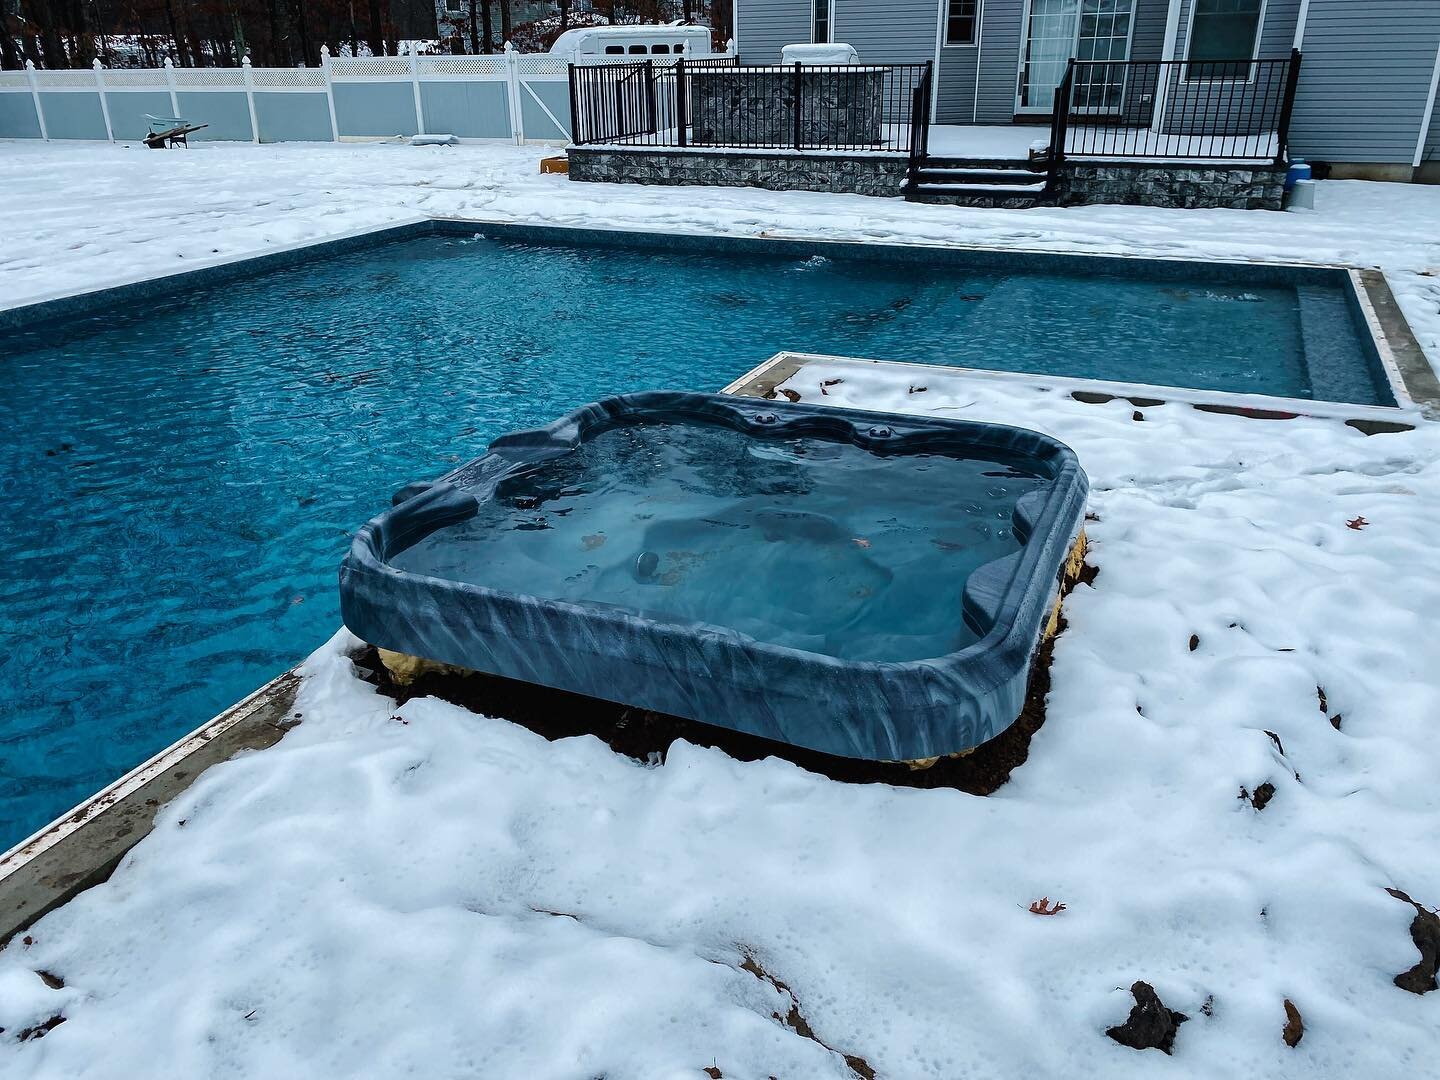 Happy Friday! Here&rsquo;s a throwback of a recent pool &amp; spa project we finished! ❄️🧊 

New Pool Build- @sweeneyspoolsvc 
Pool Equipment- @the_hayward_nation 
Pool Liner- @merlinindinc 

#longisland #longislandny #longislandhomes #longislandbac